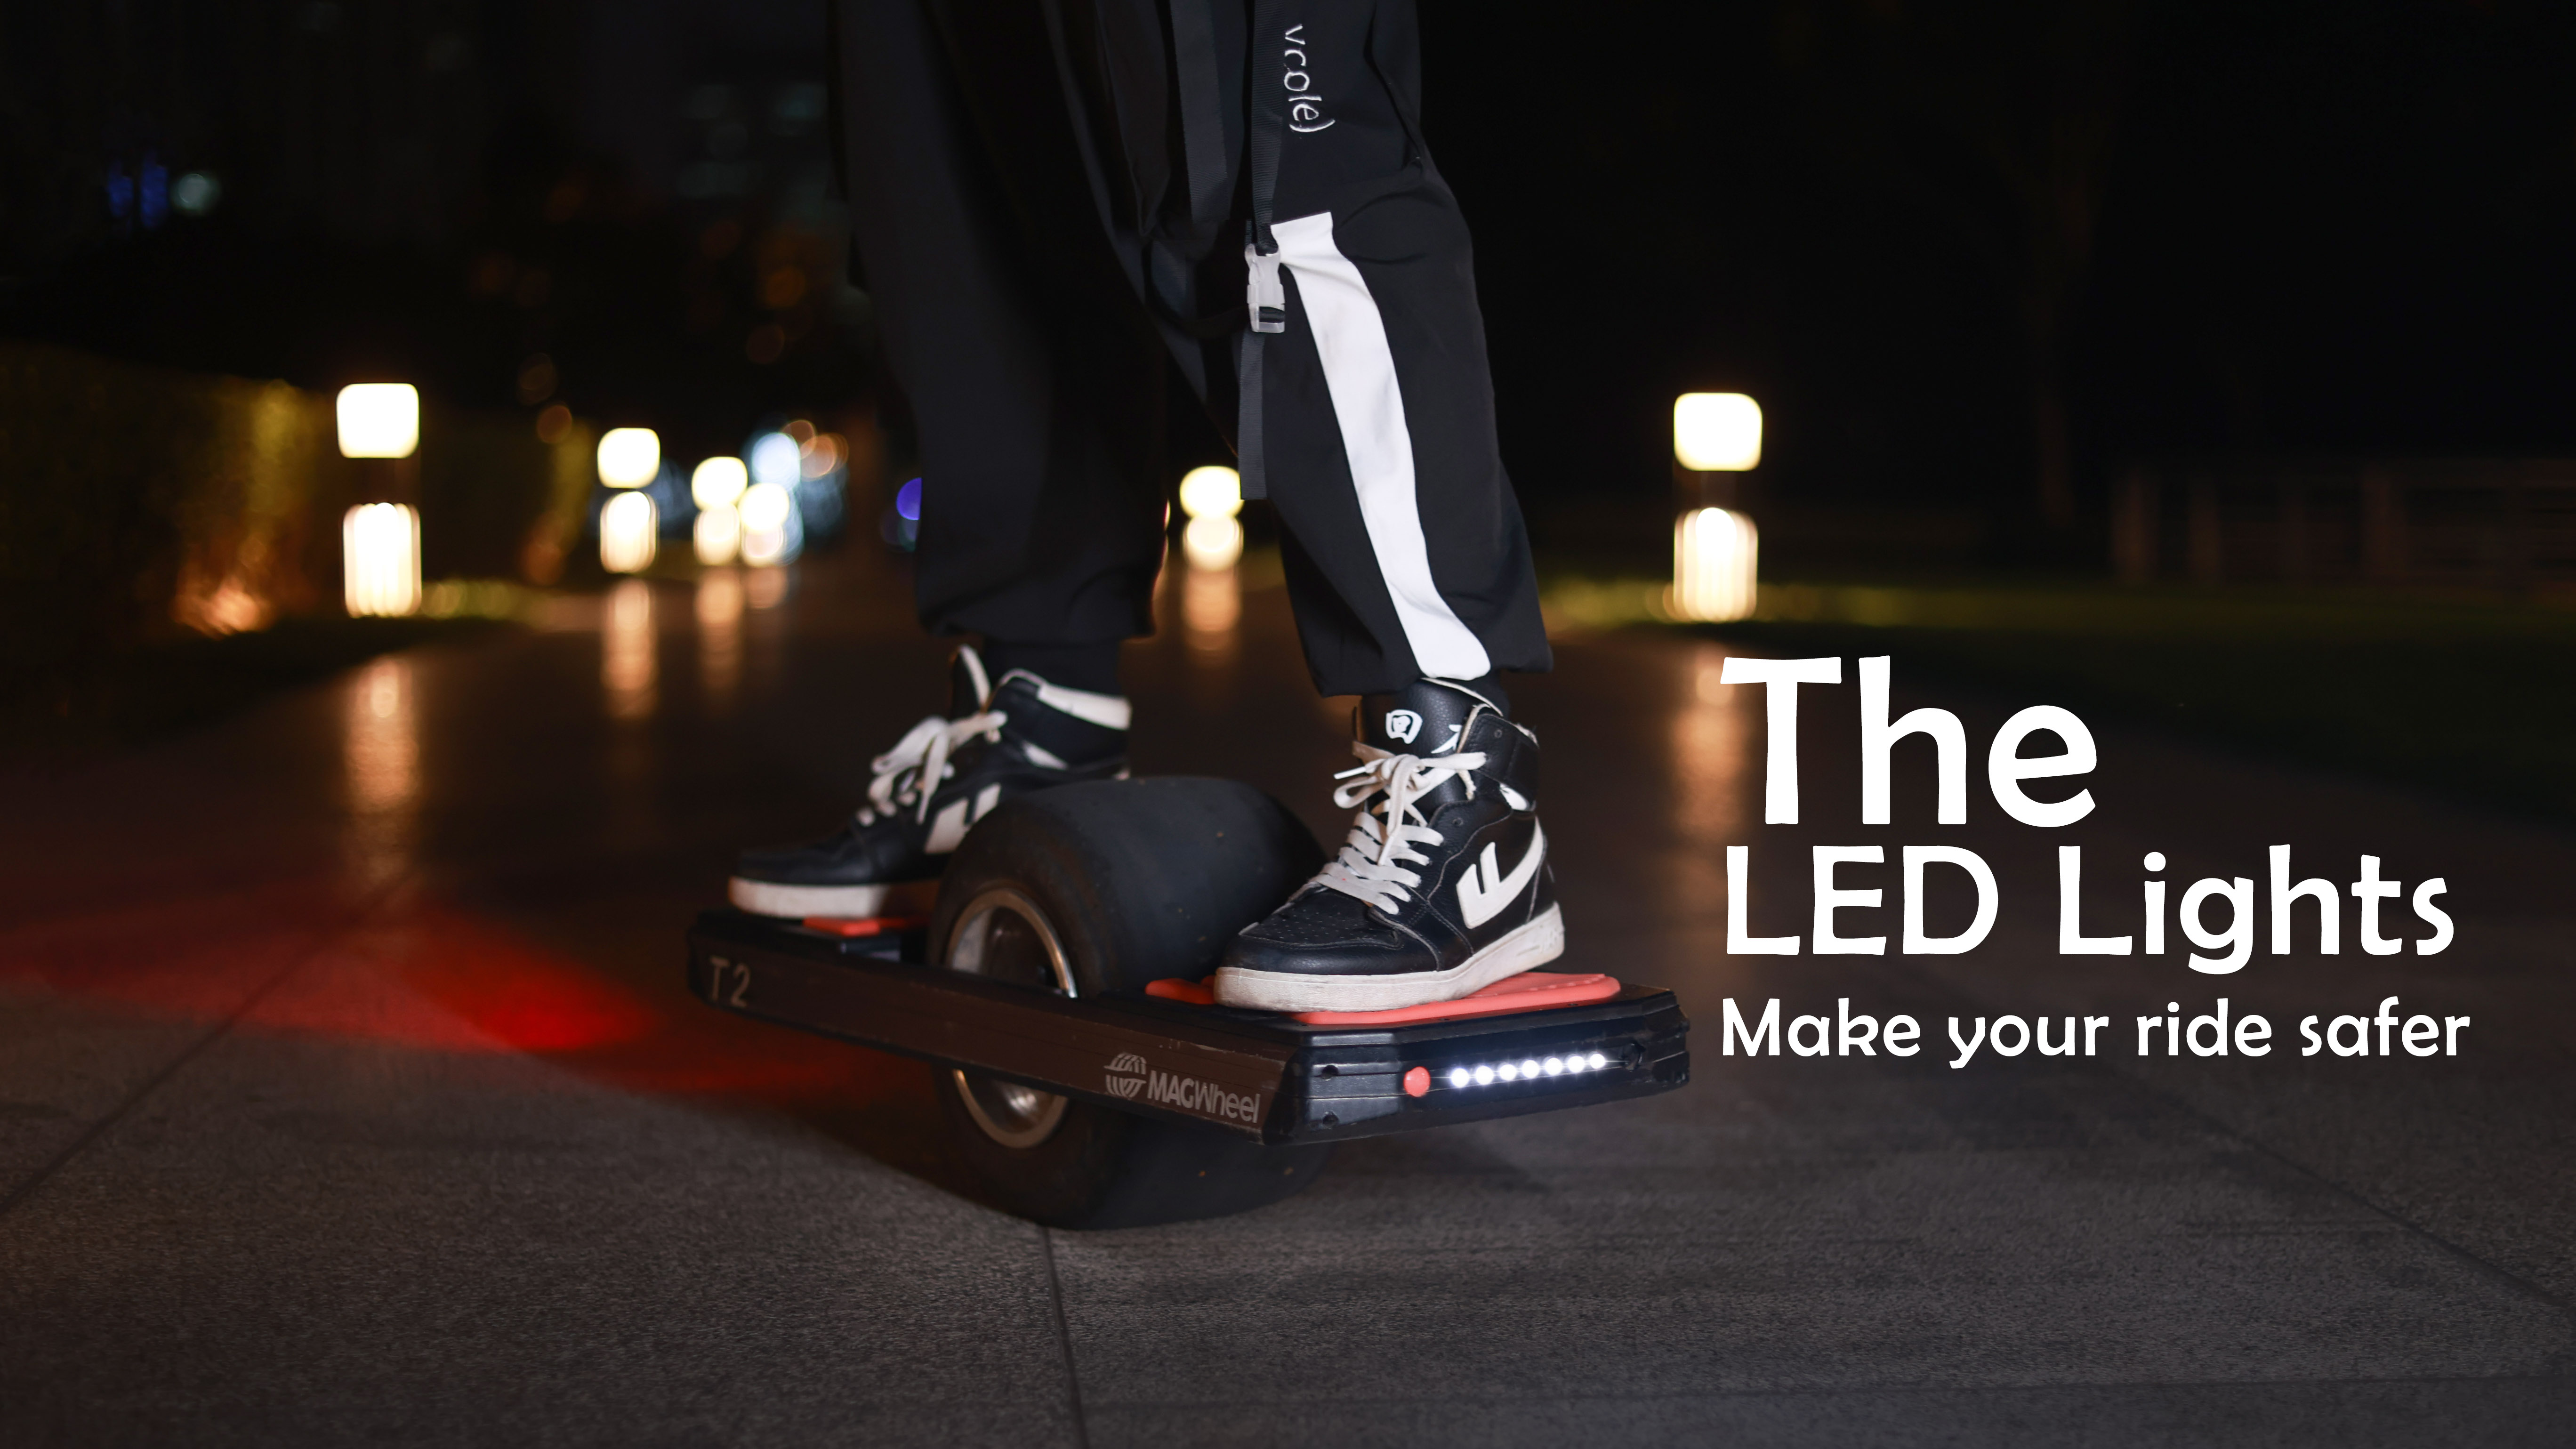 MAGWheel one wheel scooter, equipted with LED lights